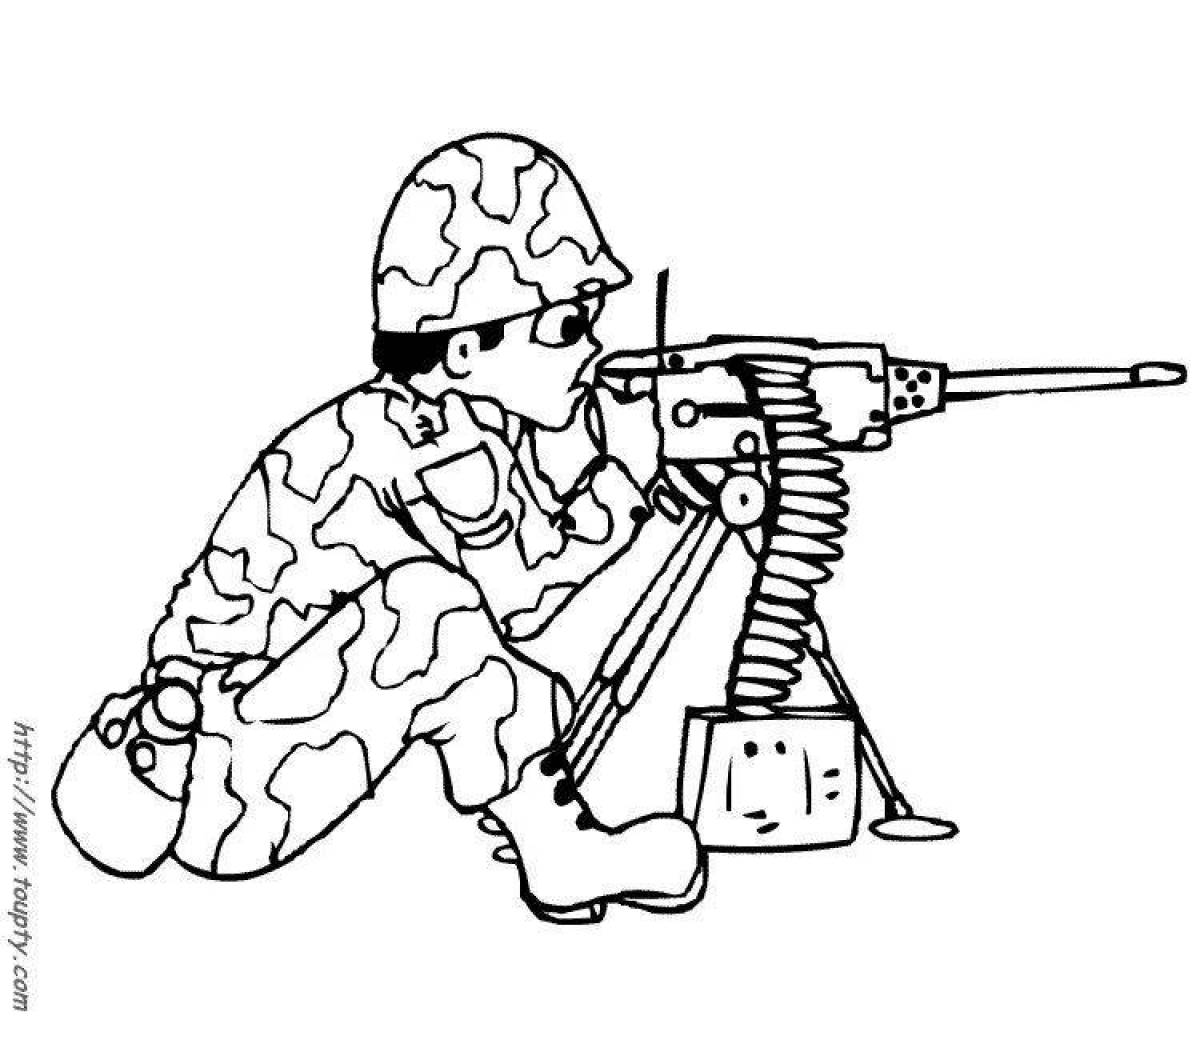 Steadless coloring of a soldier with a machine gun